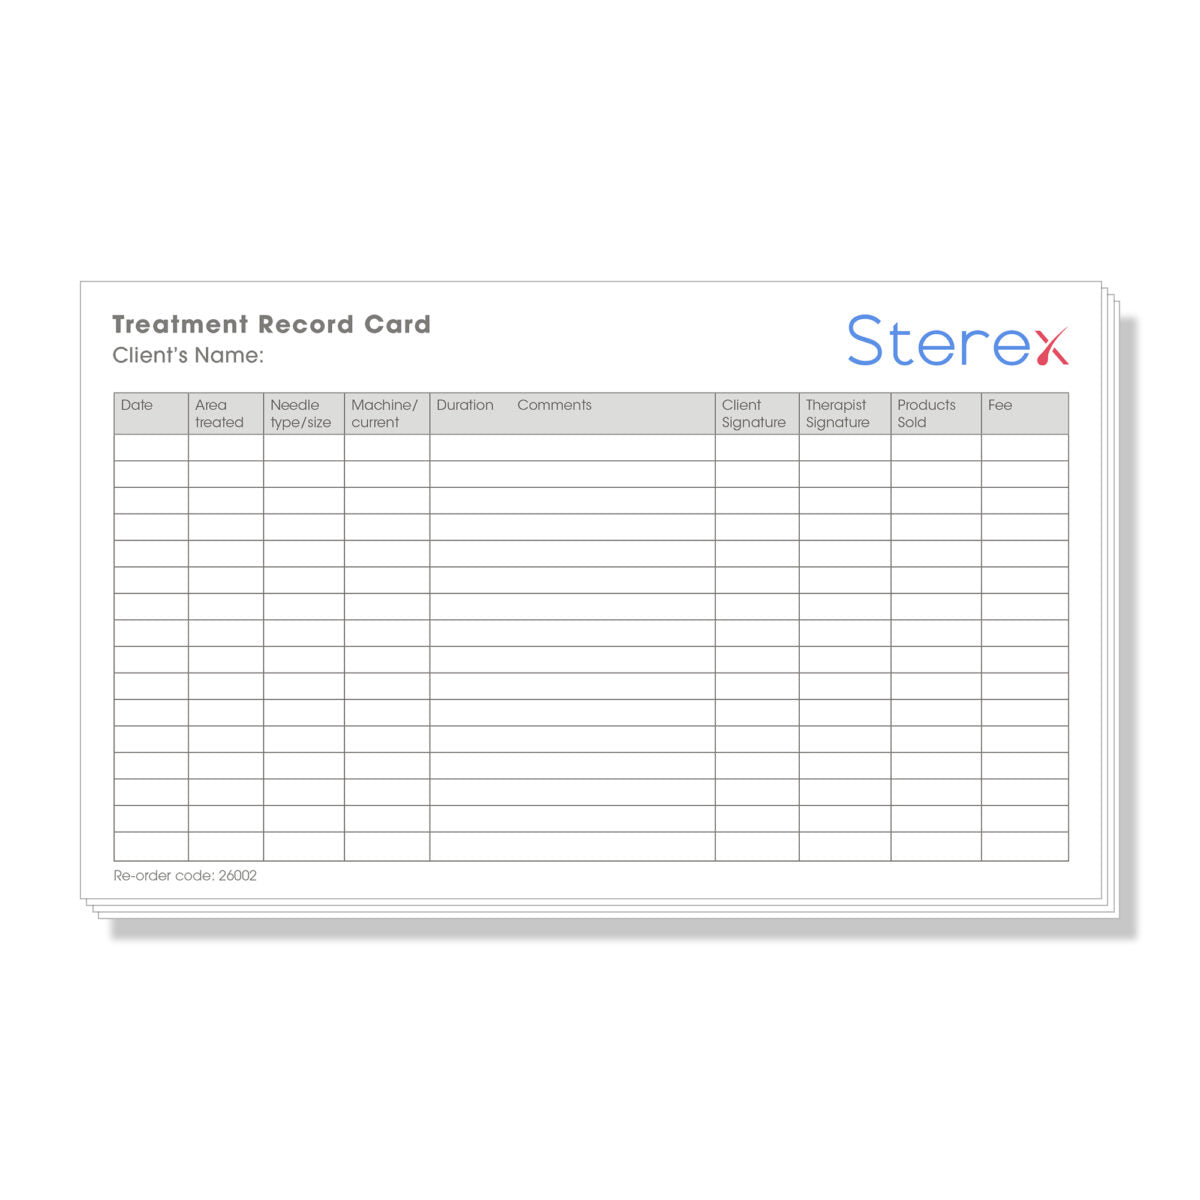 Sterex Client Treatment Record Card